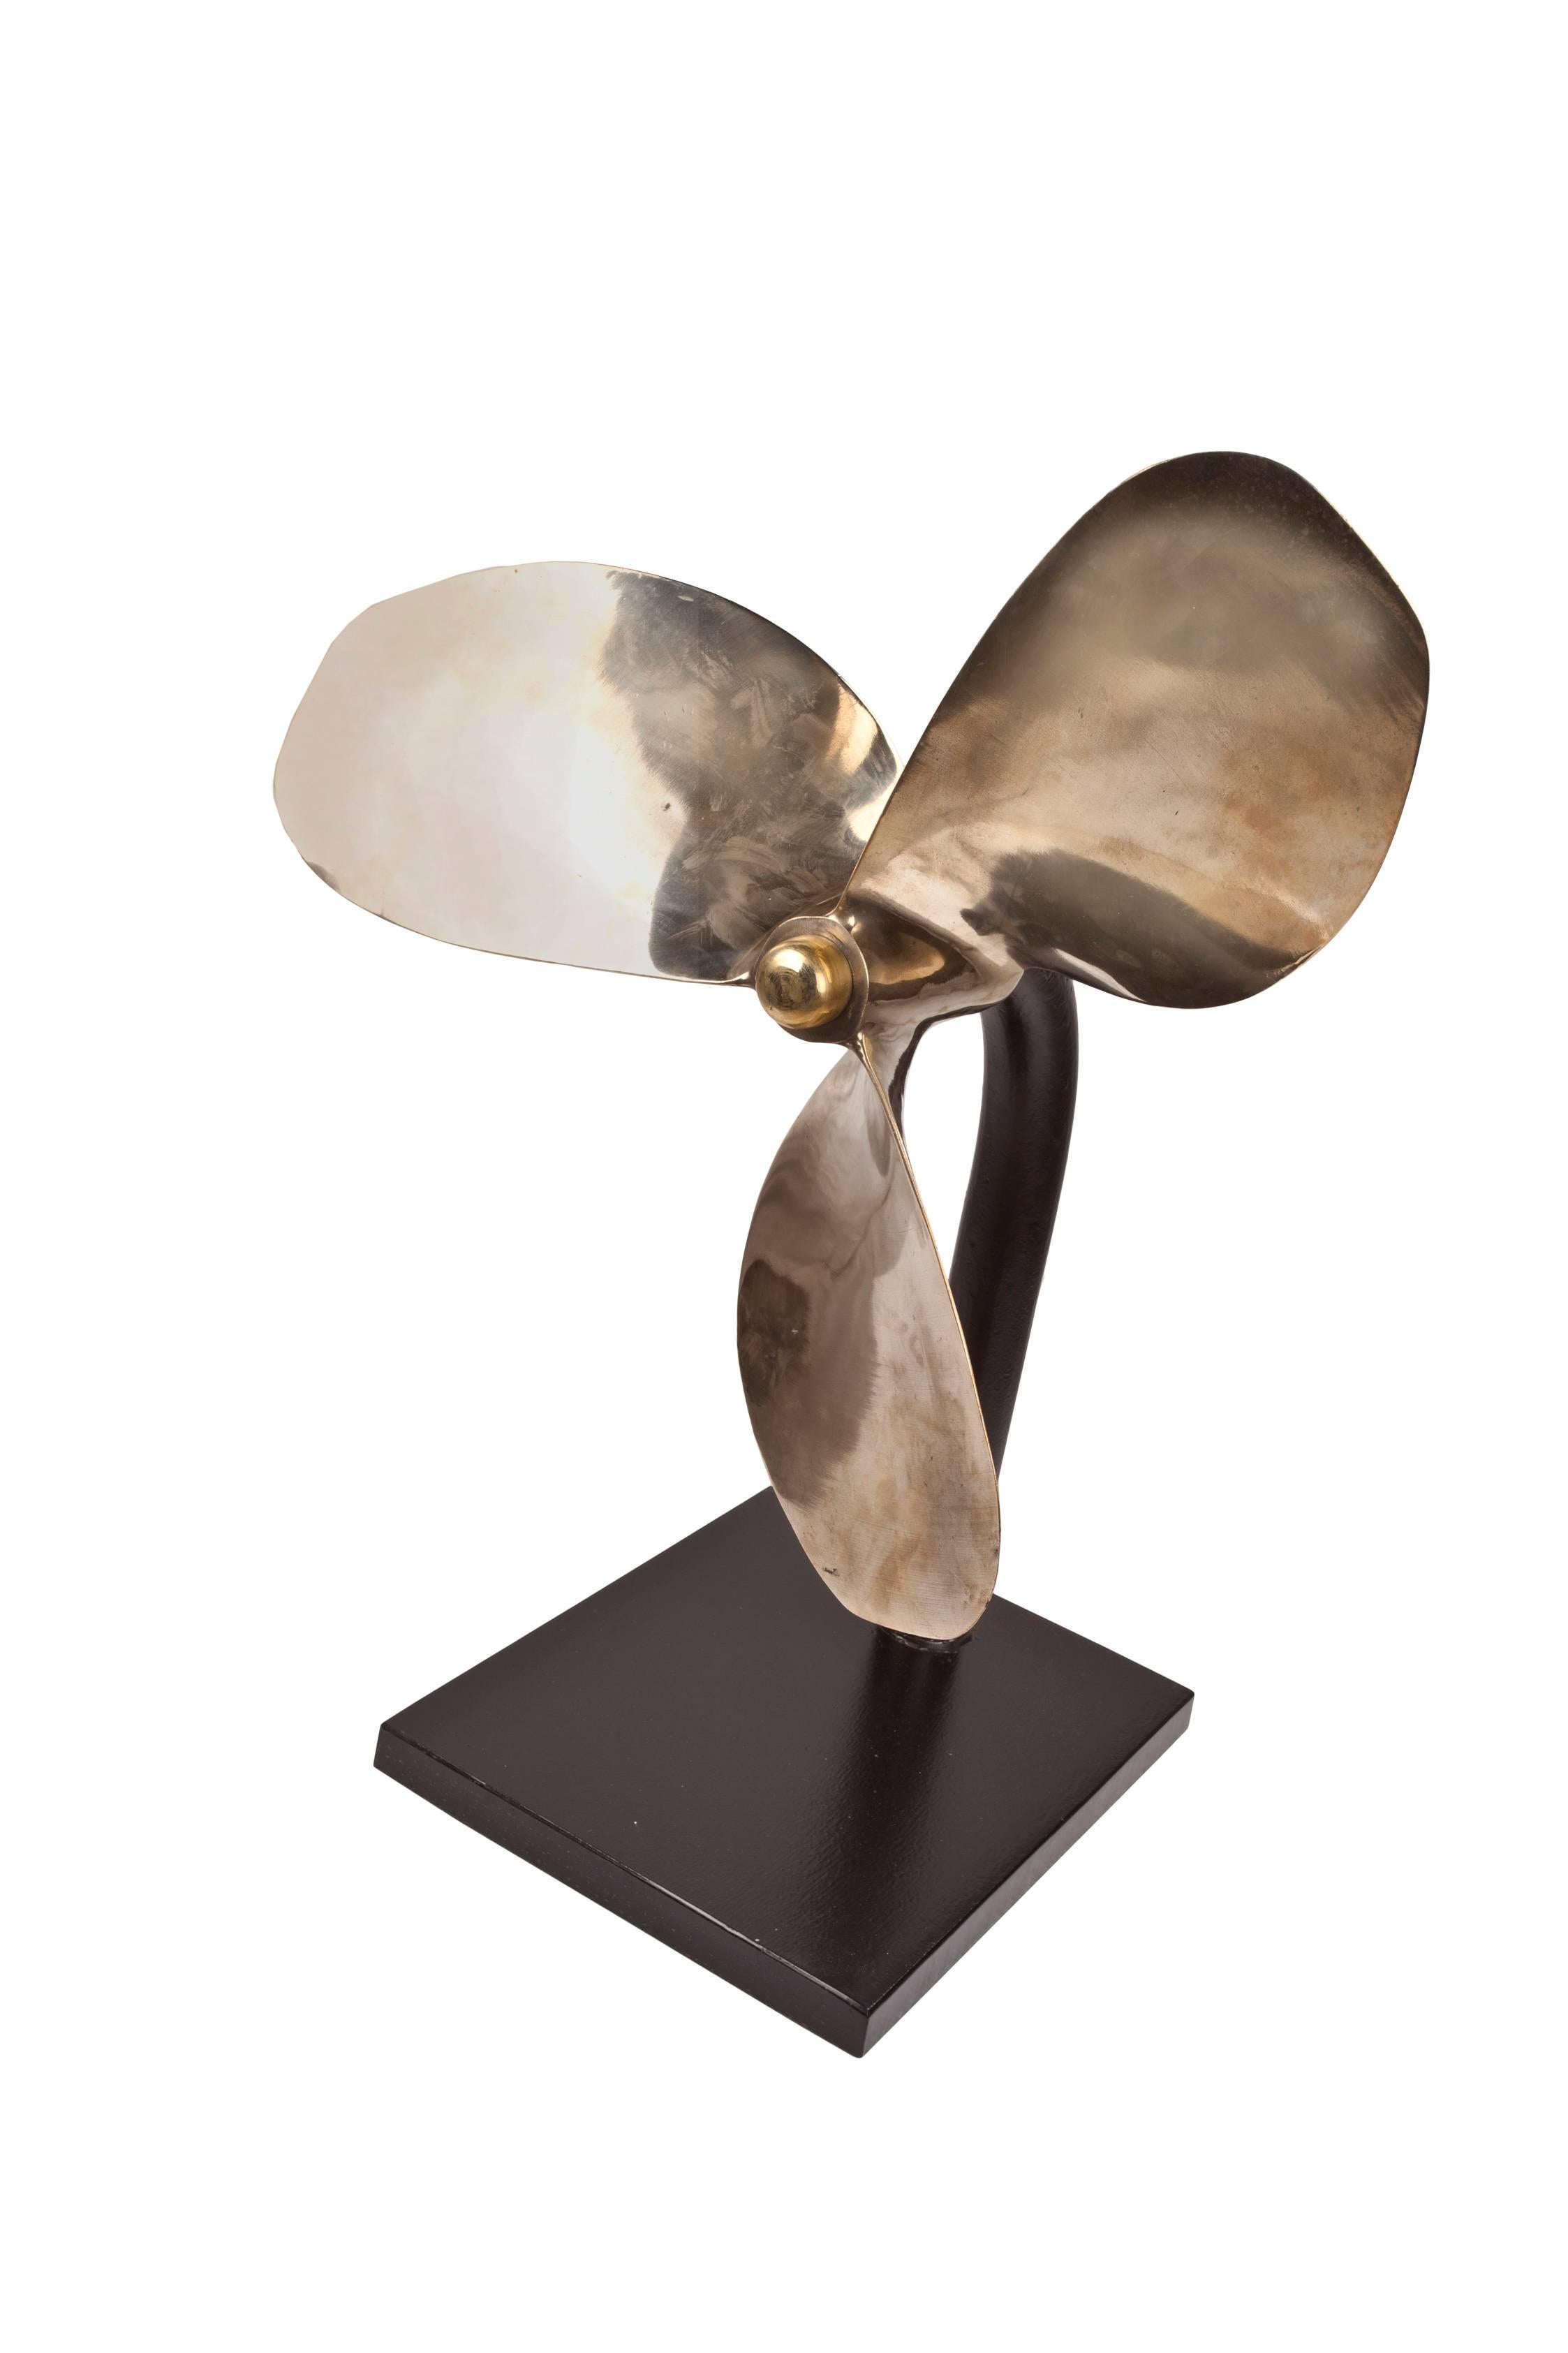 Large bronze propeller from a decommissioned lifeboat. Great scale and patina. Mounted on a custom made iron stand. Makes a wonderful sculptural piece with a history, 1970s. The base measures 12